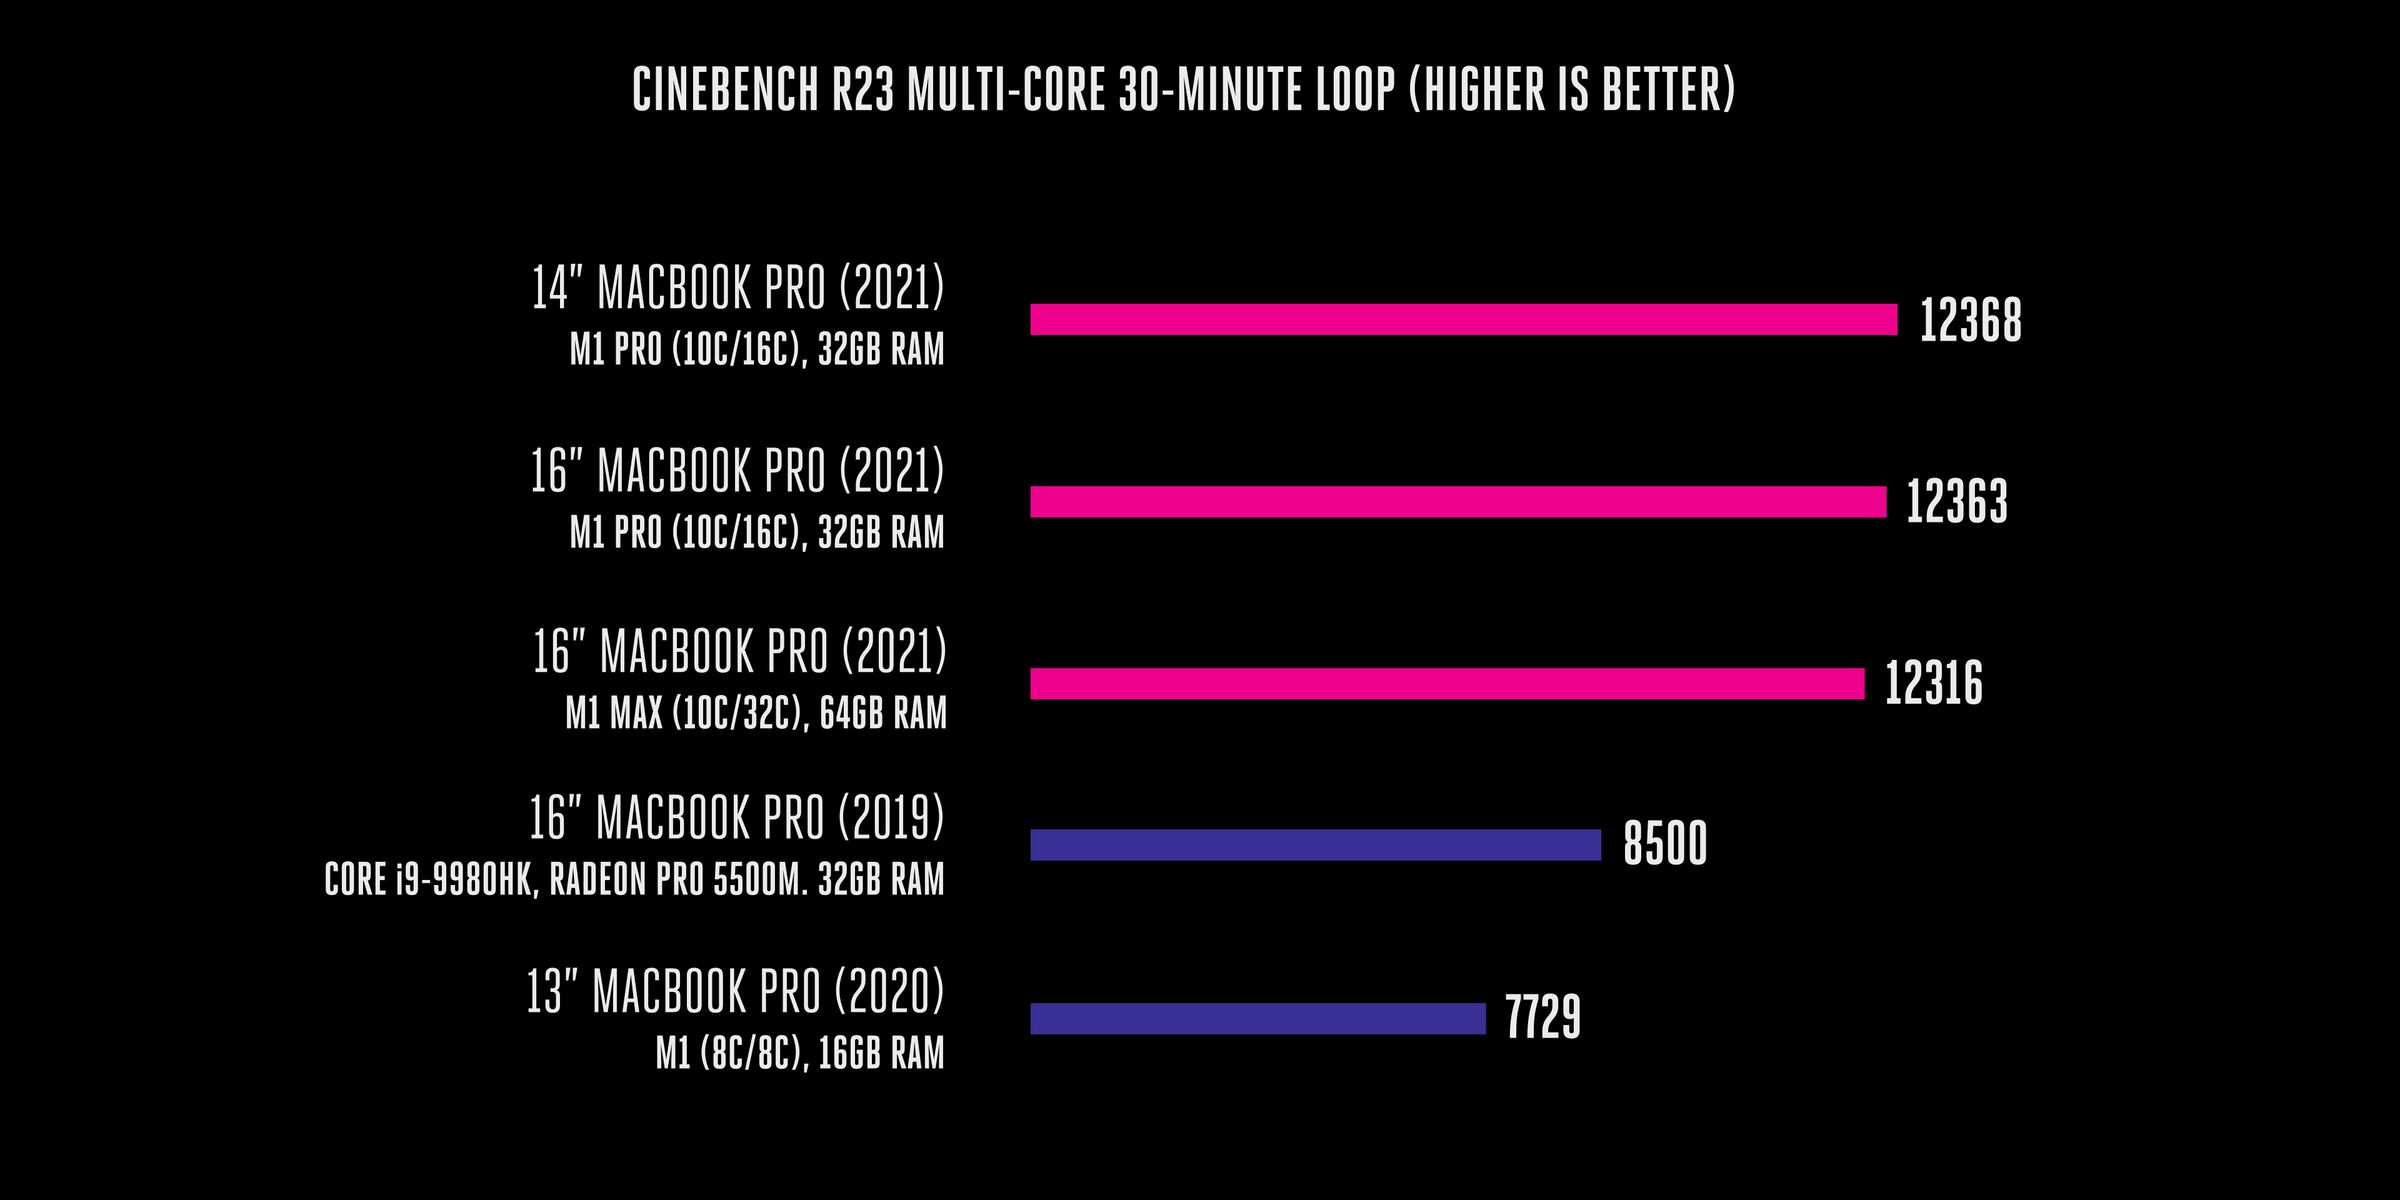 A bar graph showing a 12,368 score in Cinebench R23 multi-core 30-minute loop test for the 14-inch MacBook Pro M1 Pro, 12,363 for the 16-inch MacBook Pro M1 Pro, 12,316 for the 16-inch MacBook Pro M1 Max, 8,500 for the 16-inch MacBook Pro 2019, and 7,729 for the 13-inch MacBook Pro M1.